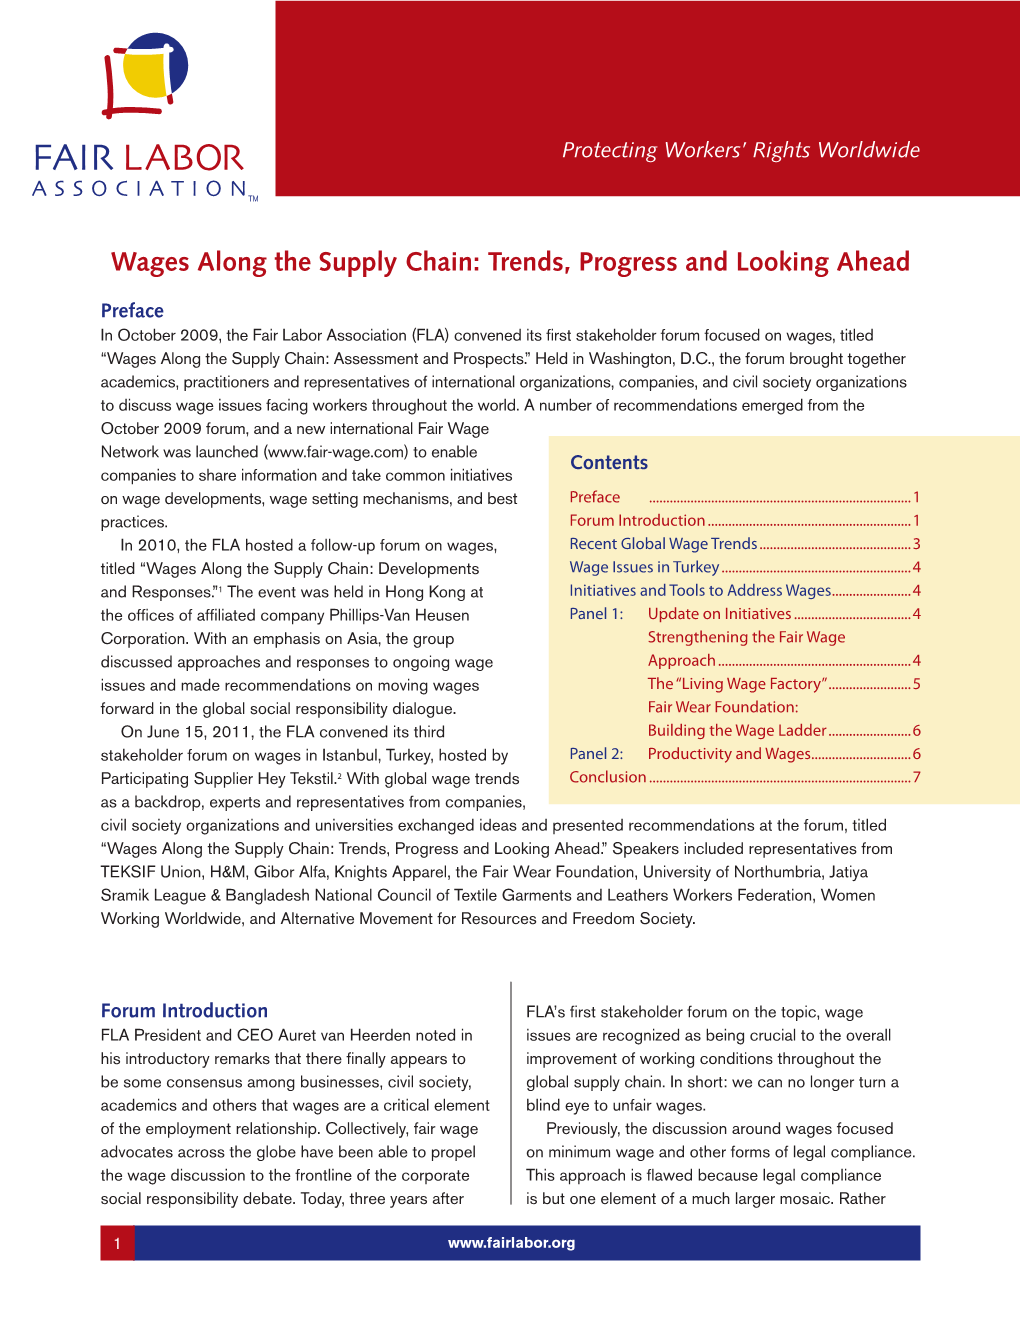 Wages Along the Supply Chain: Trends, Progress and Looking Ahead